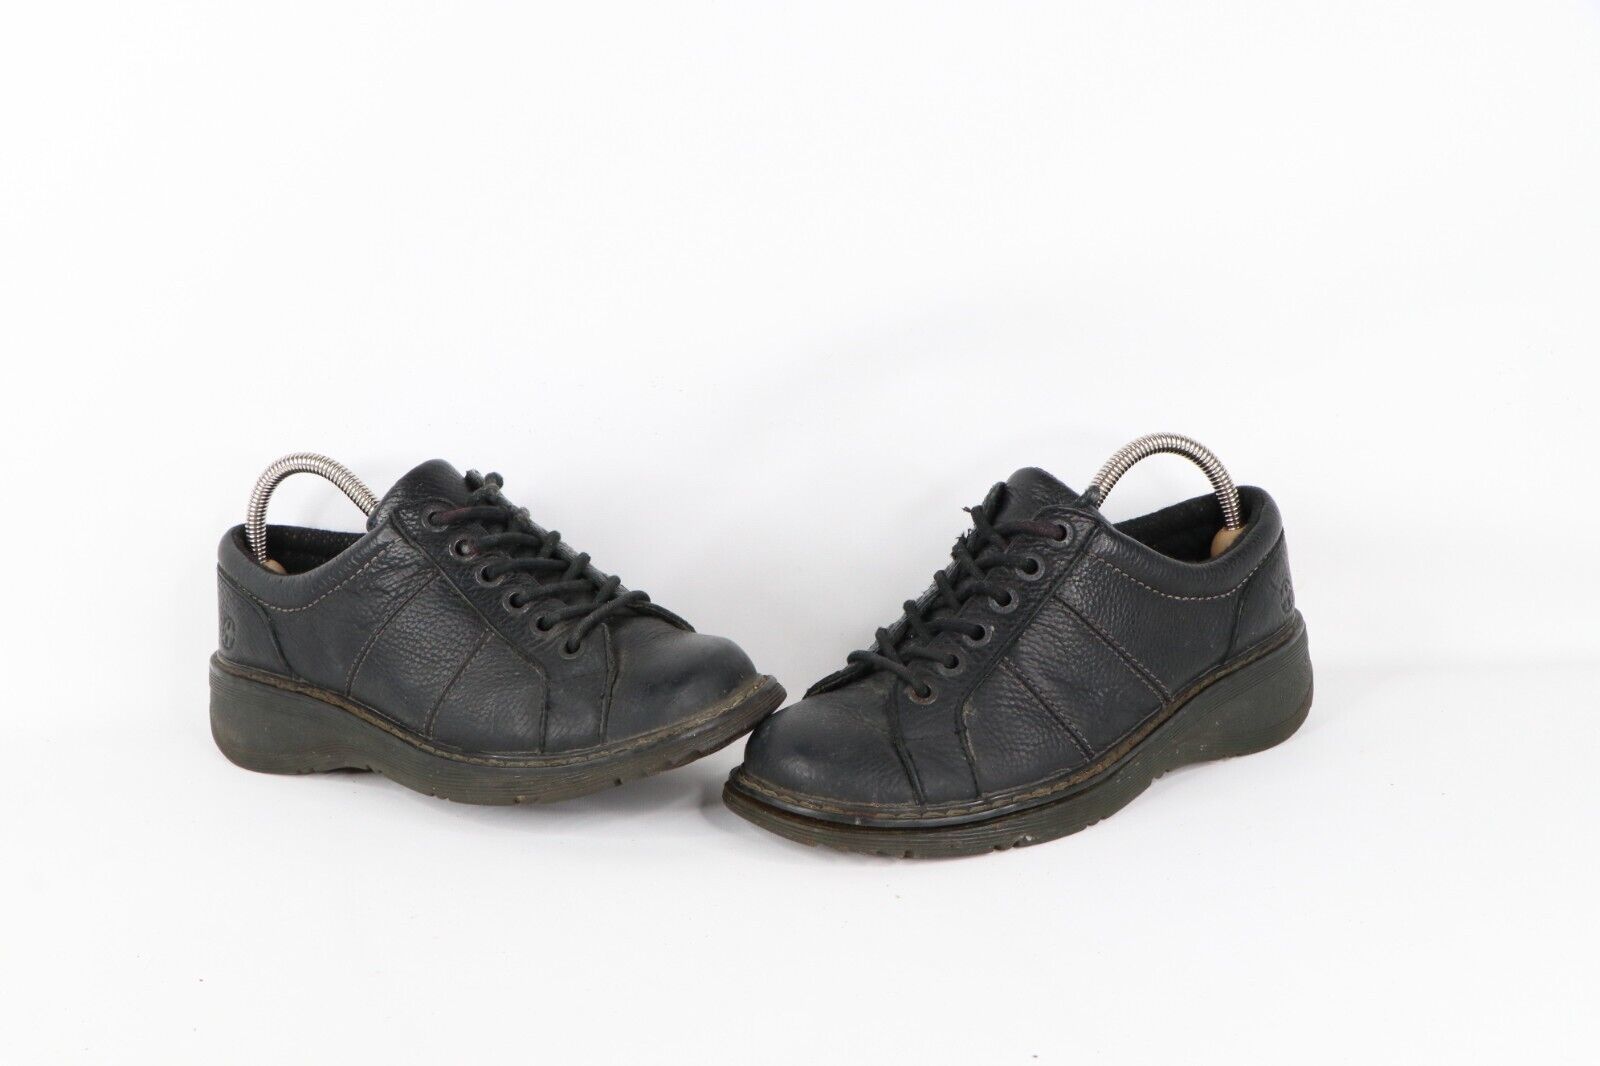 Primary image for Vtg 90s Dr Martens Womens 8 Goth Distressed Leather Chunky Platform Shoes AS IS